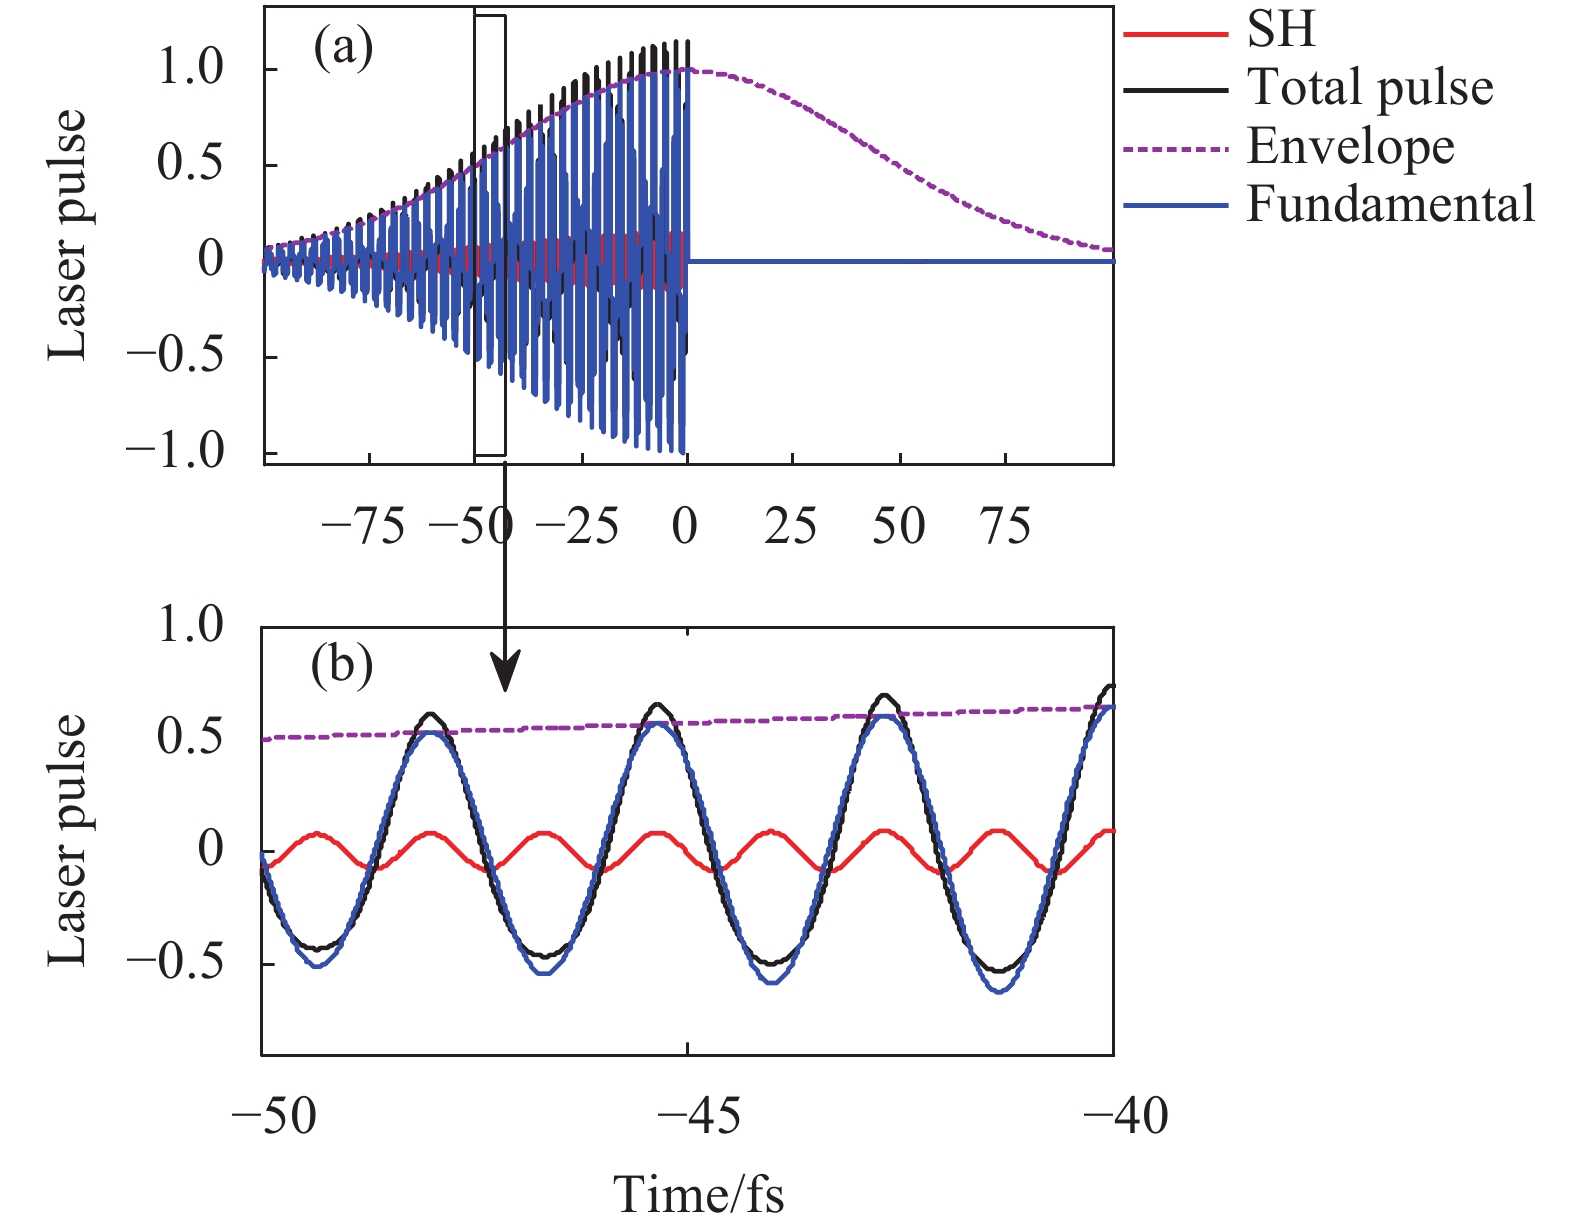 The slow turn-on, rapid turn-off laser pulse (blue line), its SH pulse (red line), their combined pulse (black line), and a normal pulse shape in the temporal domain (purple dashed line). (a) is the whole figure, and (b) is its magnified partition from −50 fs to −40 fs